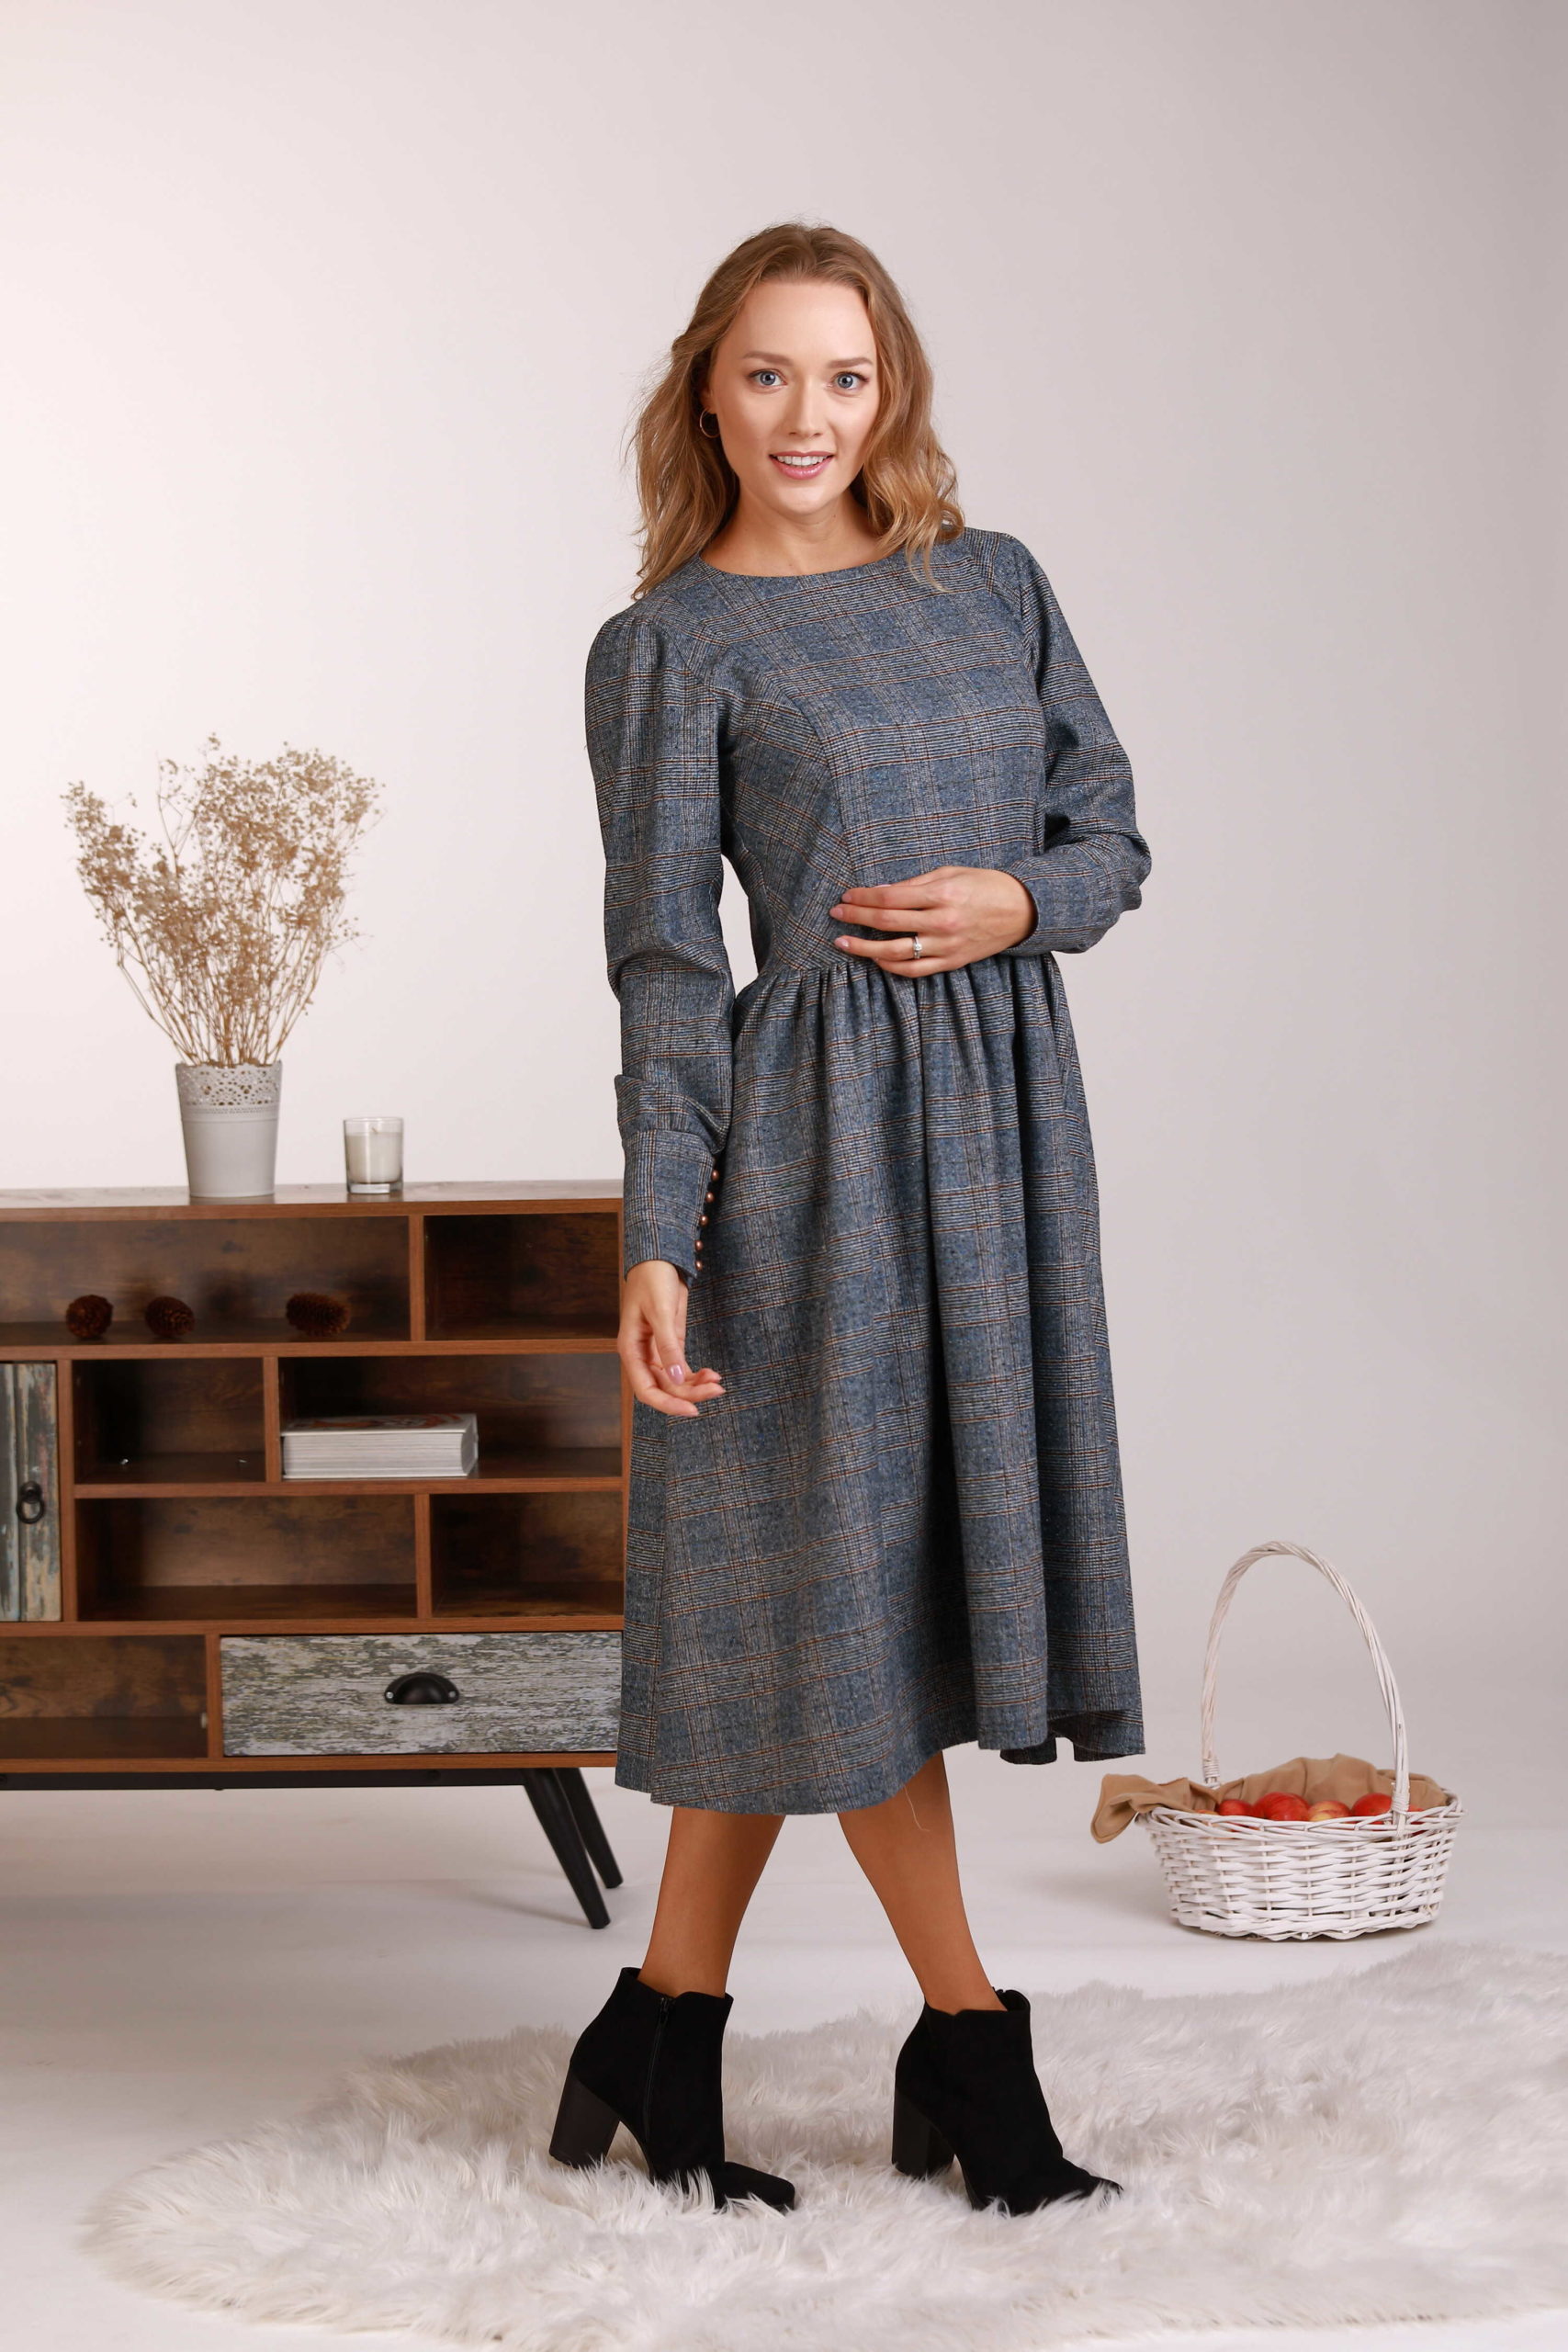 Woolen Doll Dress. Female Needlework Sewing and Knitting Stock Photo -  Image of handmade, thread: 165674222